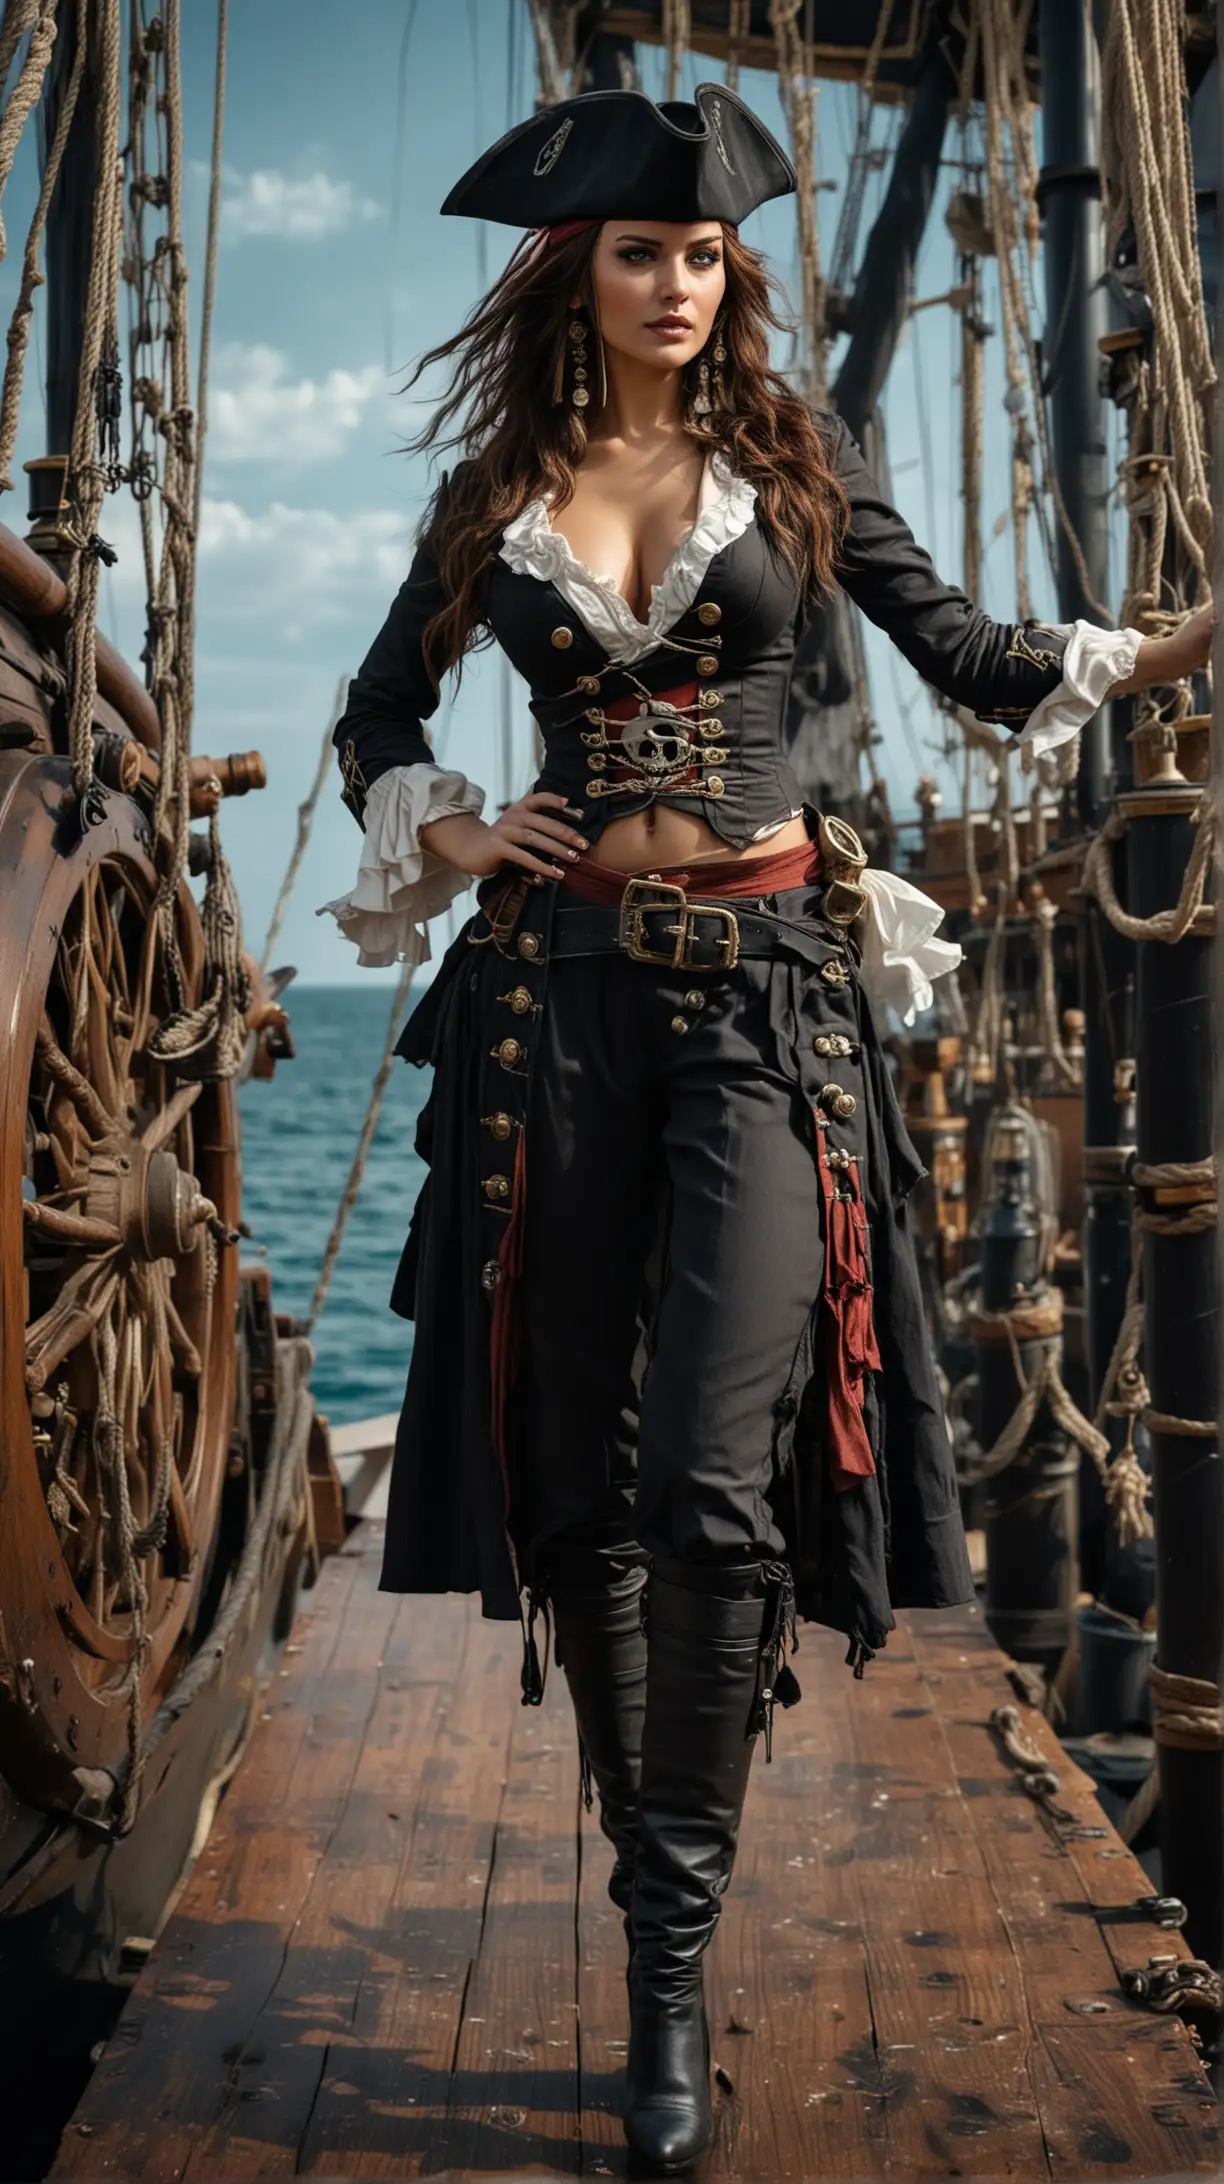 Beautiful Russian Supermodel in Luxurious Black Jack Sparrow Pirates Uniform on Sail Ship Pirate Background